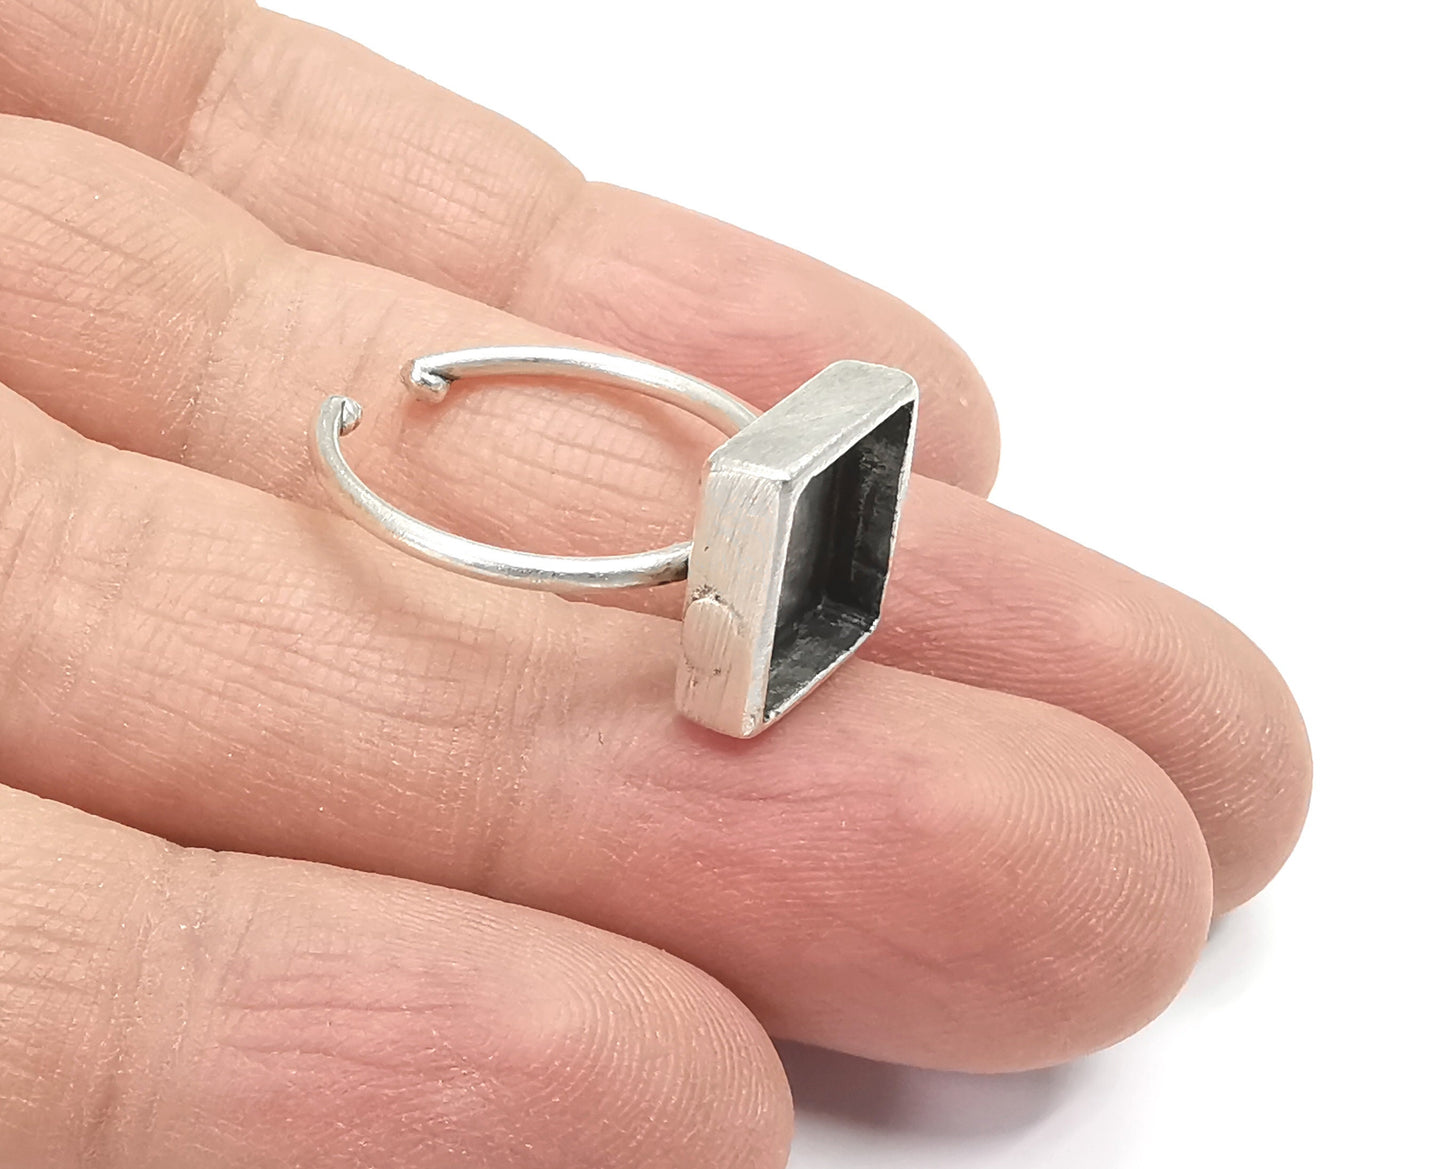 Ring Blanks Silver Square Ring Setting Cabochon Mounting Adjustable Ring Base Bezel Antique Silver Plated Brass